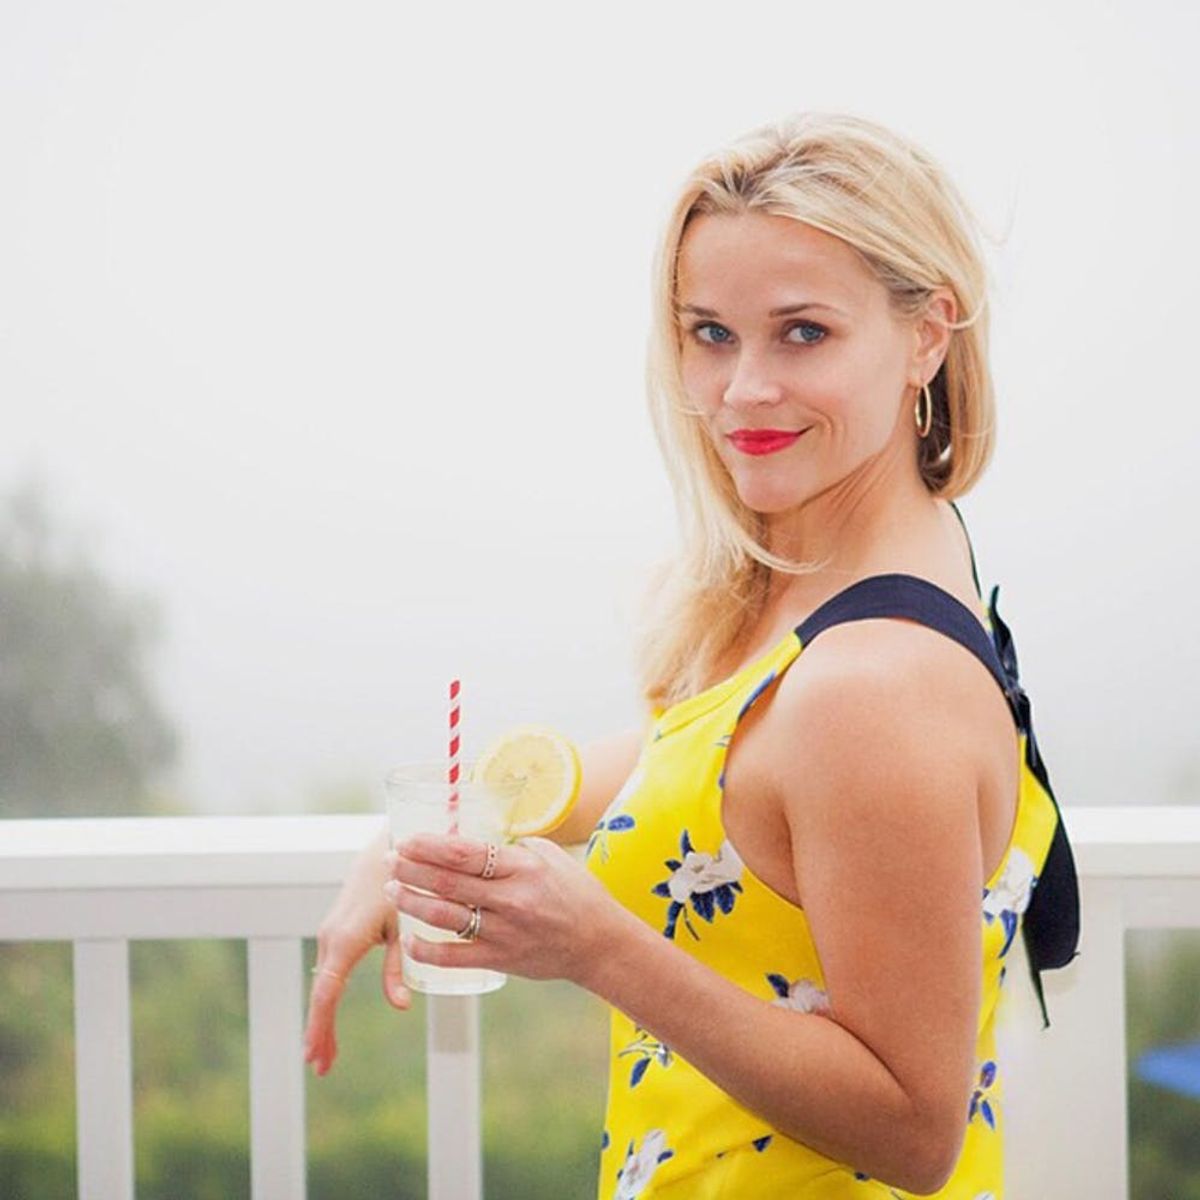 12 DIYs Reese Witherspoon Should be Pinning on Her New Pinterest Account